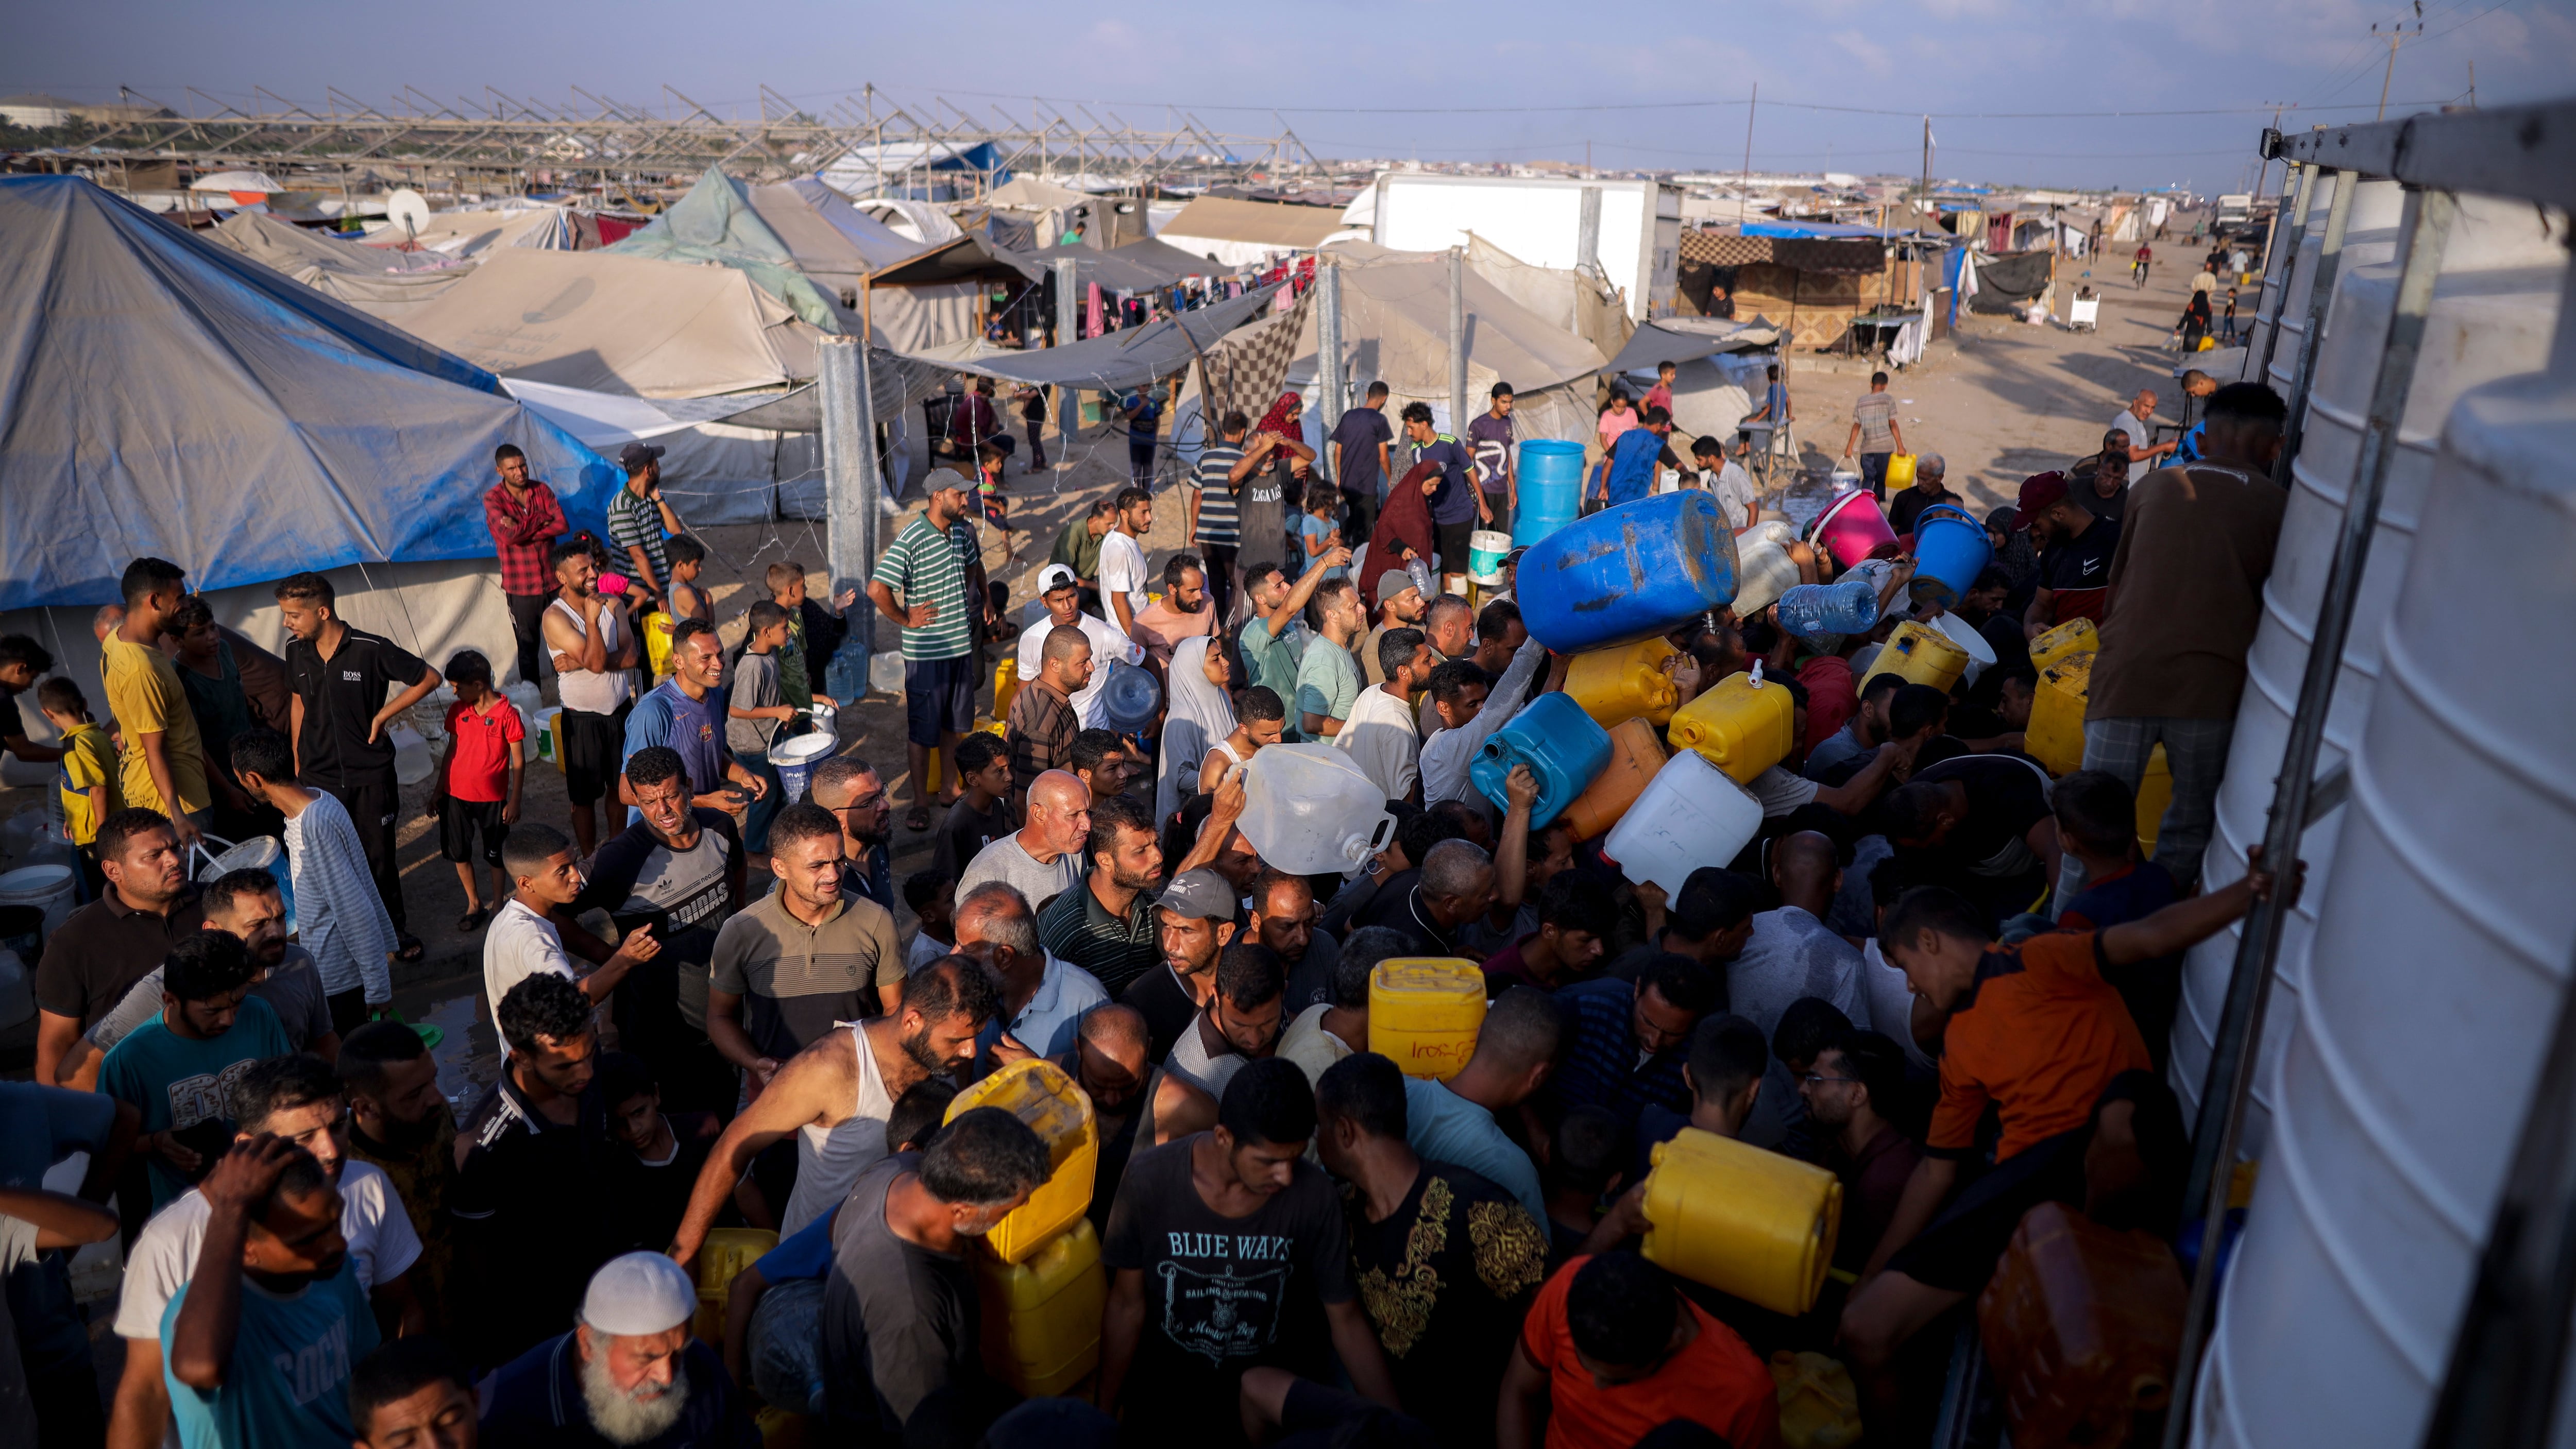 Palestinians displaced by the Israeli bombardment of the Gaza Strip queue for water at a makeshift tent camp in the southern town of Khan Younis on Monday (Jehad Alshrafi/AP)